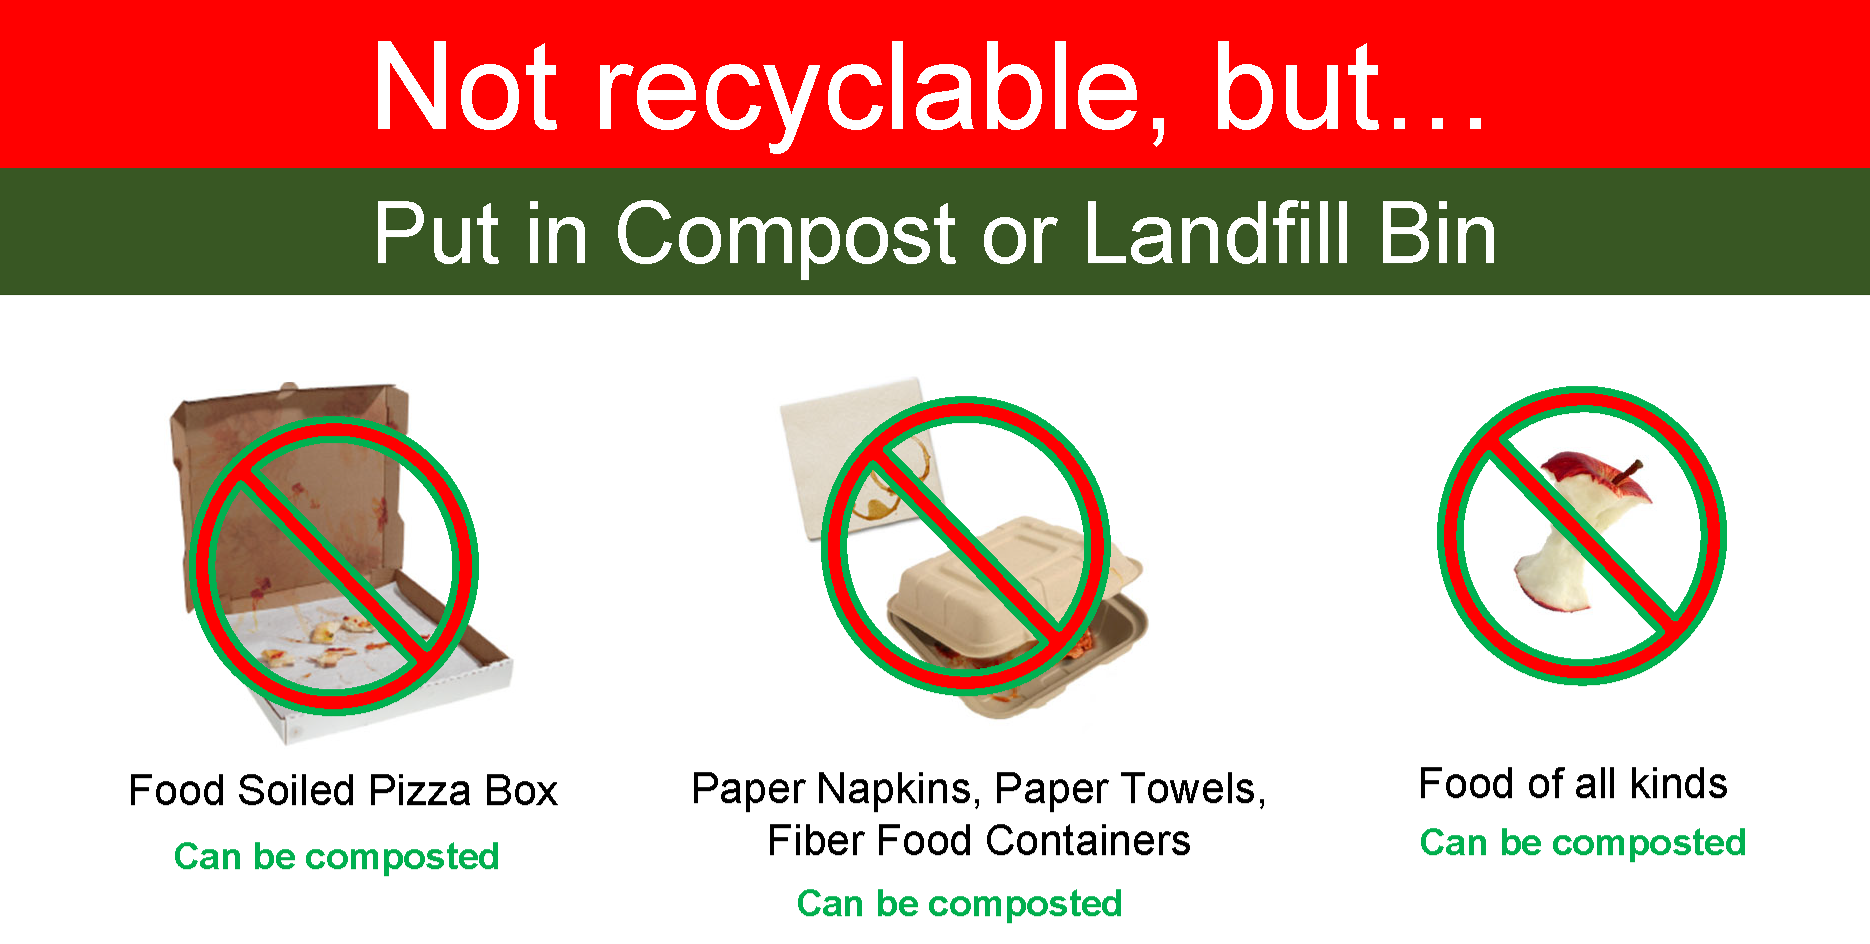 List of items that are not recyclable but are compostable